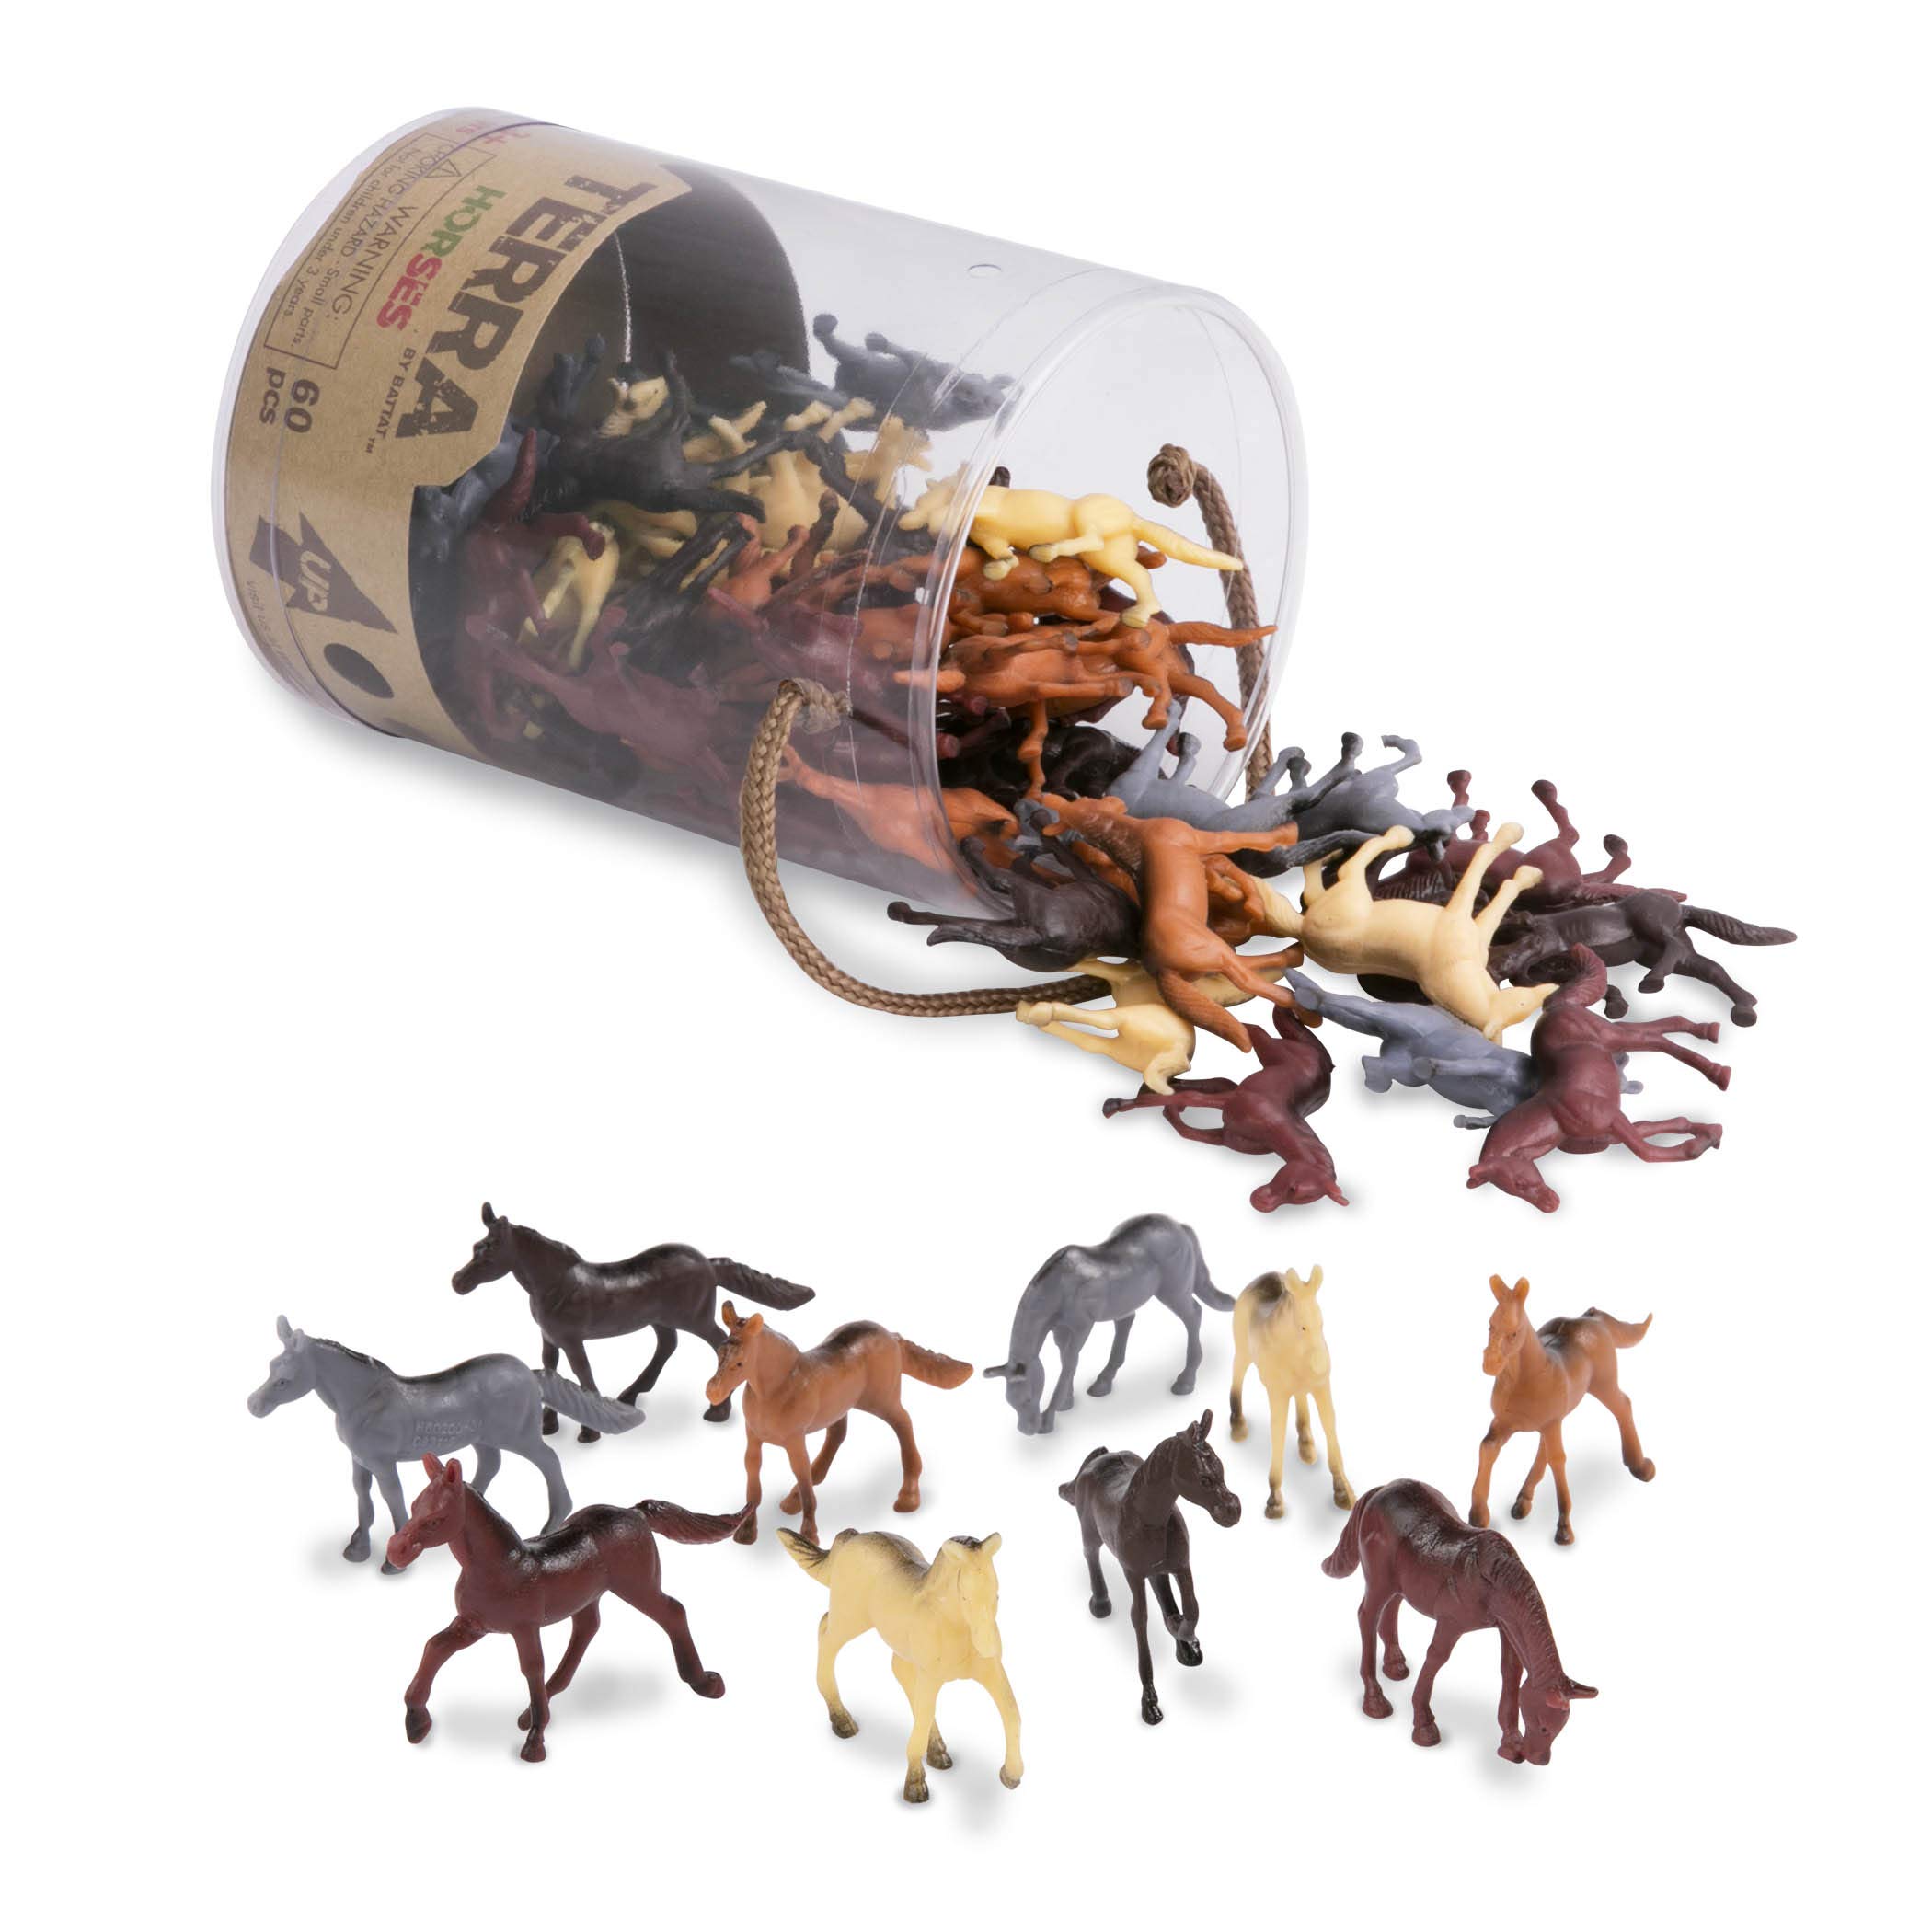 Mua Terra 60-Piece Animal Figures Collection Horse Toy Set in Bucket, Mini  Horse Figures - Toy from 3 Years trên Amazon Đức chính hãng 2023 |  Giaonhan247